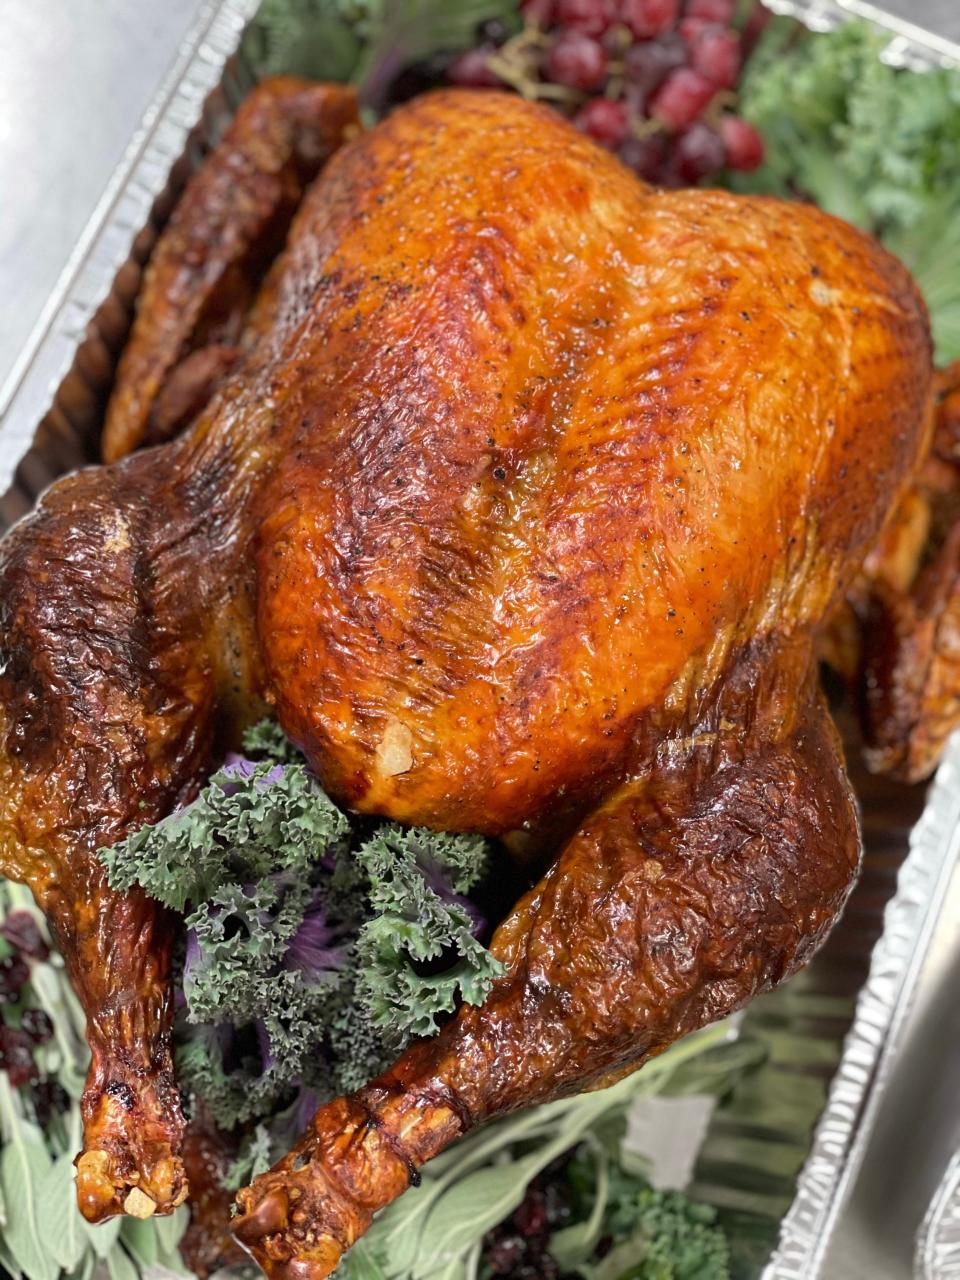 A roasted, organic, free-range Murray's turkey prepared by Main Course Catering in New Paltz, NY.